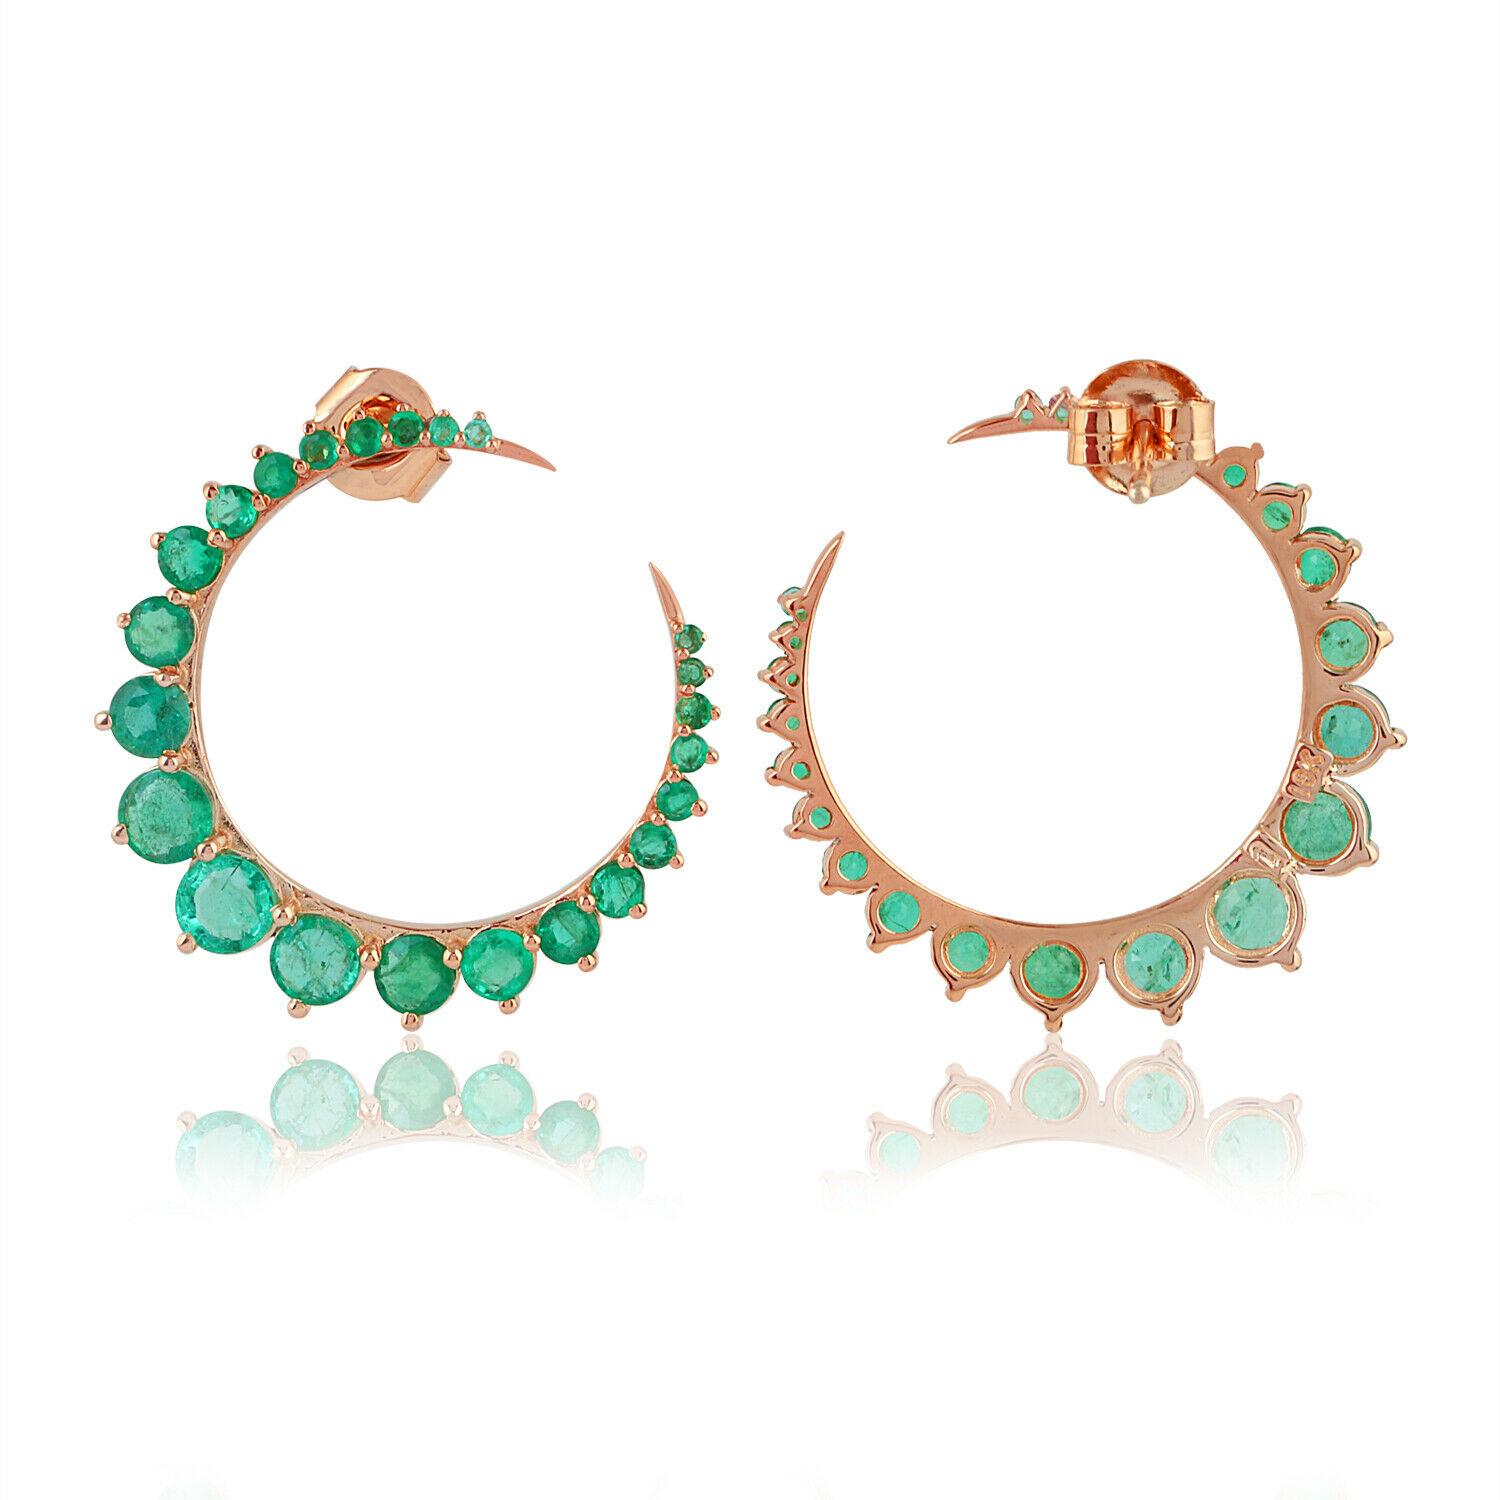 This beautiful hoop earrings are handmade in 14K rose gold and set in 3.95 carats of emeralds.

FOLLOW MEGHNA JEWELS storefront to view the latest collection & exclusive pieces. Meghna Jewels is proudly rated as a Top Seller on 1stdibs with 5 star